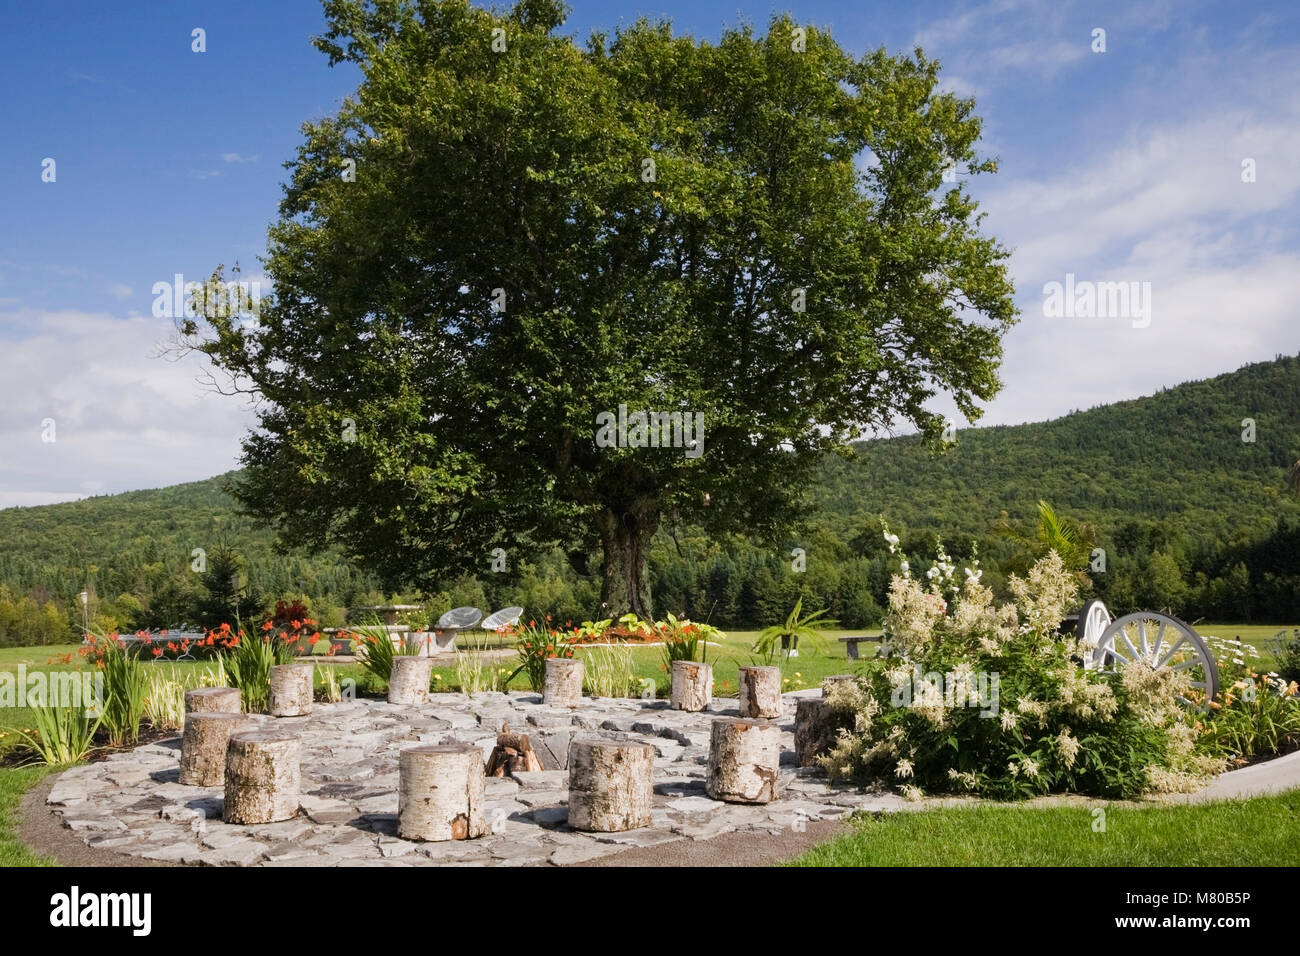 Birch tree stumps in a circle around fire pit in landscaped backyard garden in summer. Stock Photo